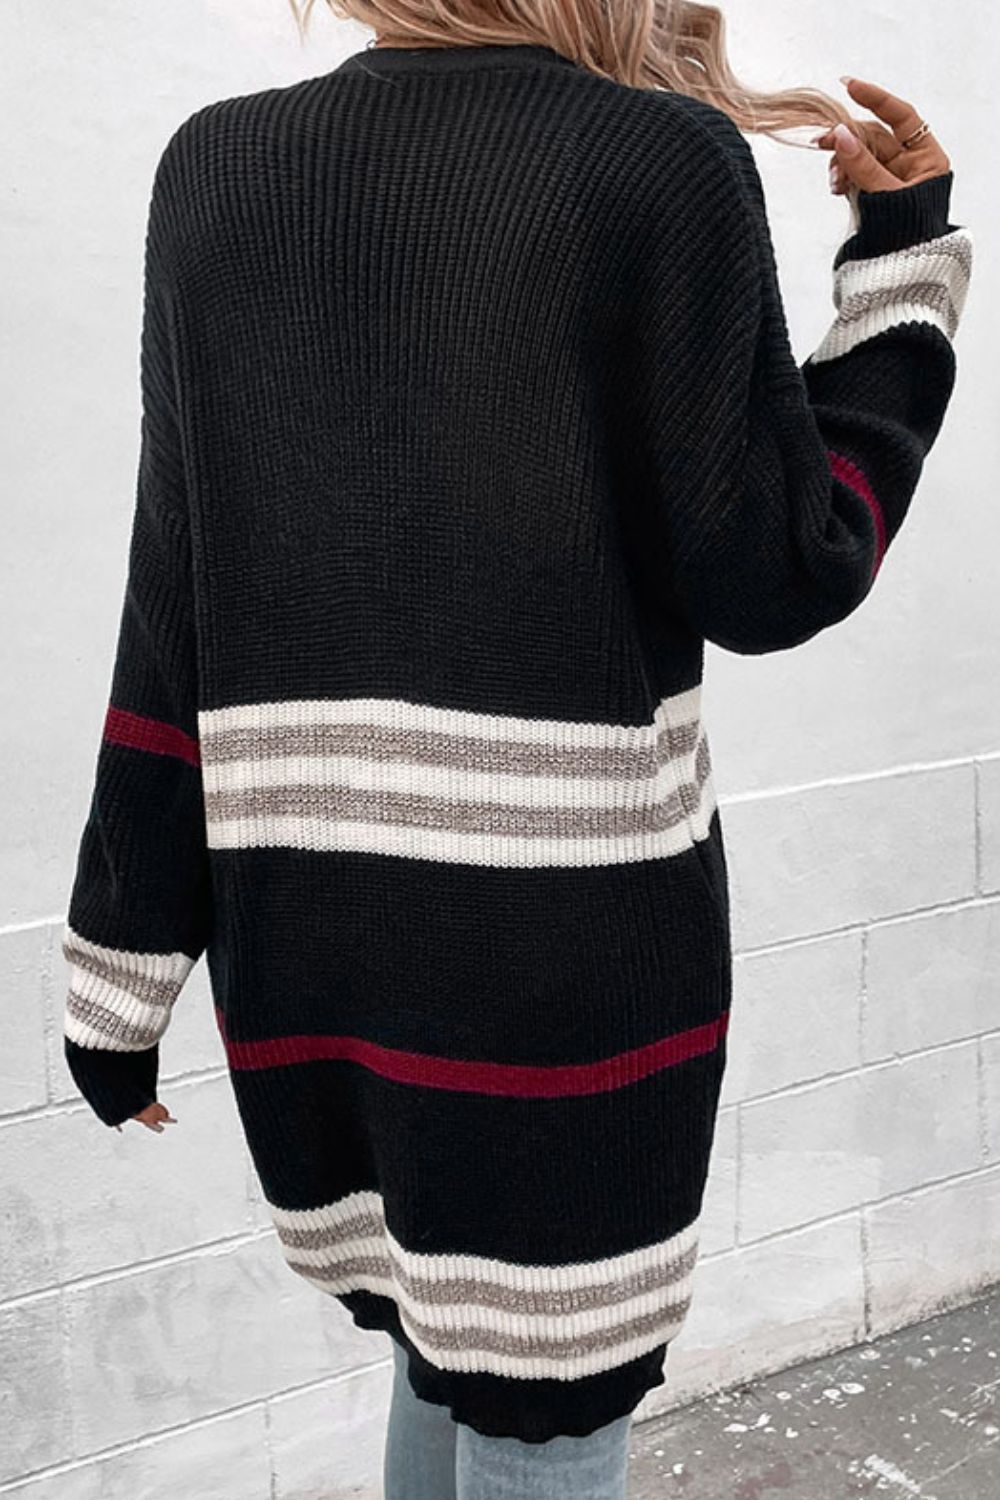 LADIES--SWEATER--Striped, Rib-Knit, Drop Shoulder, Open Front, Mid-Length Cardigan